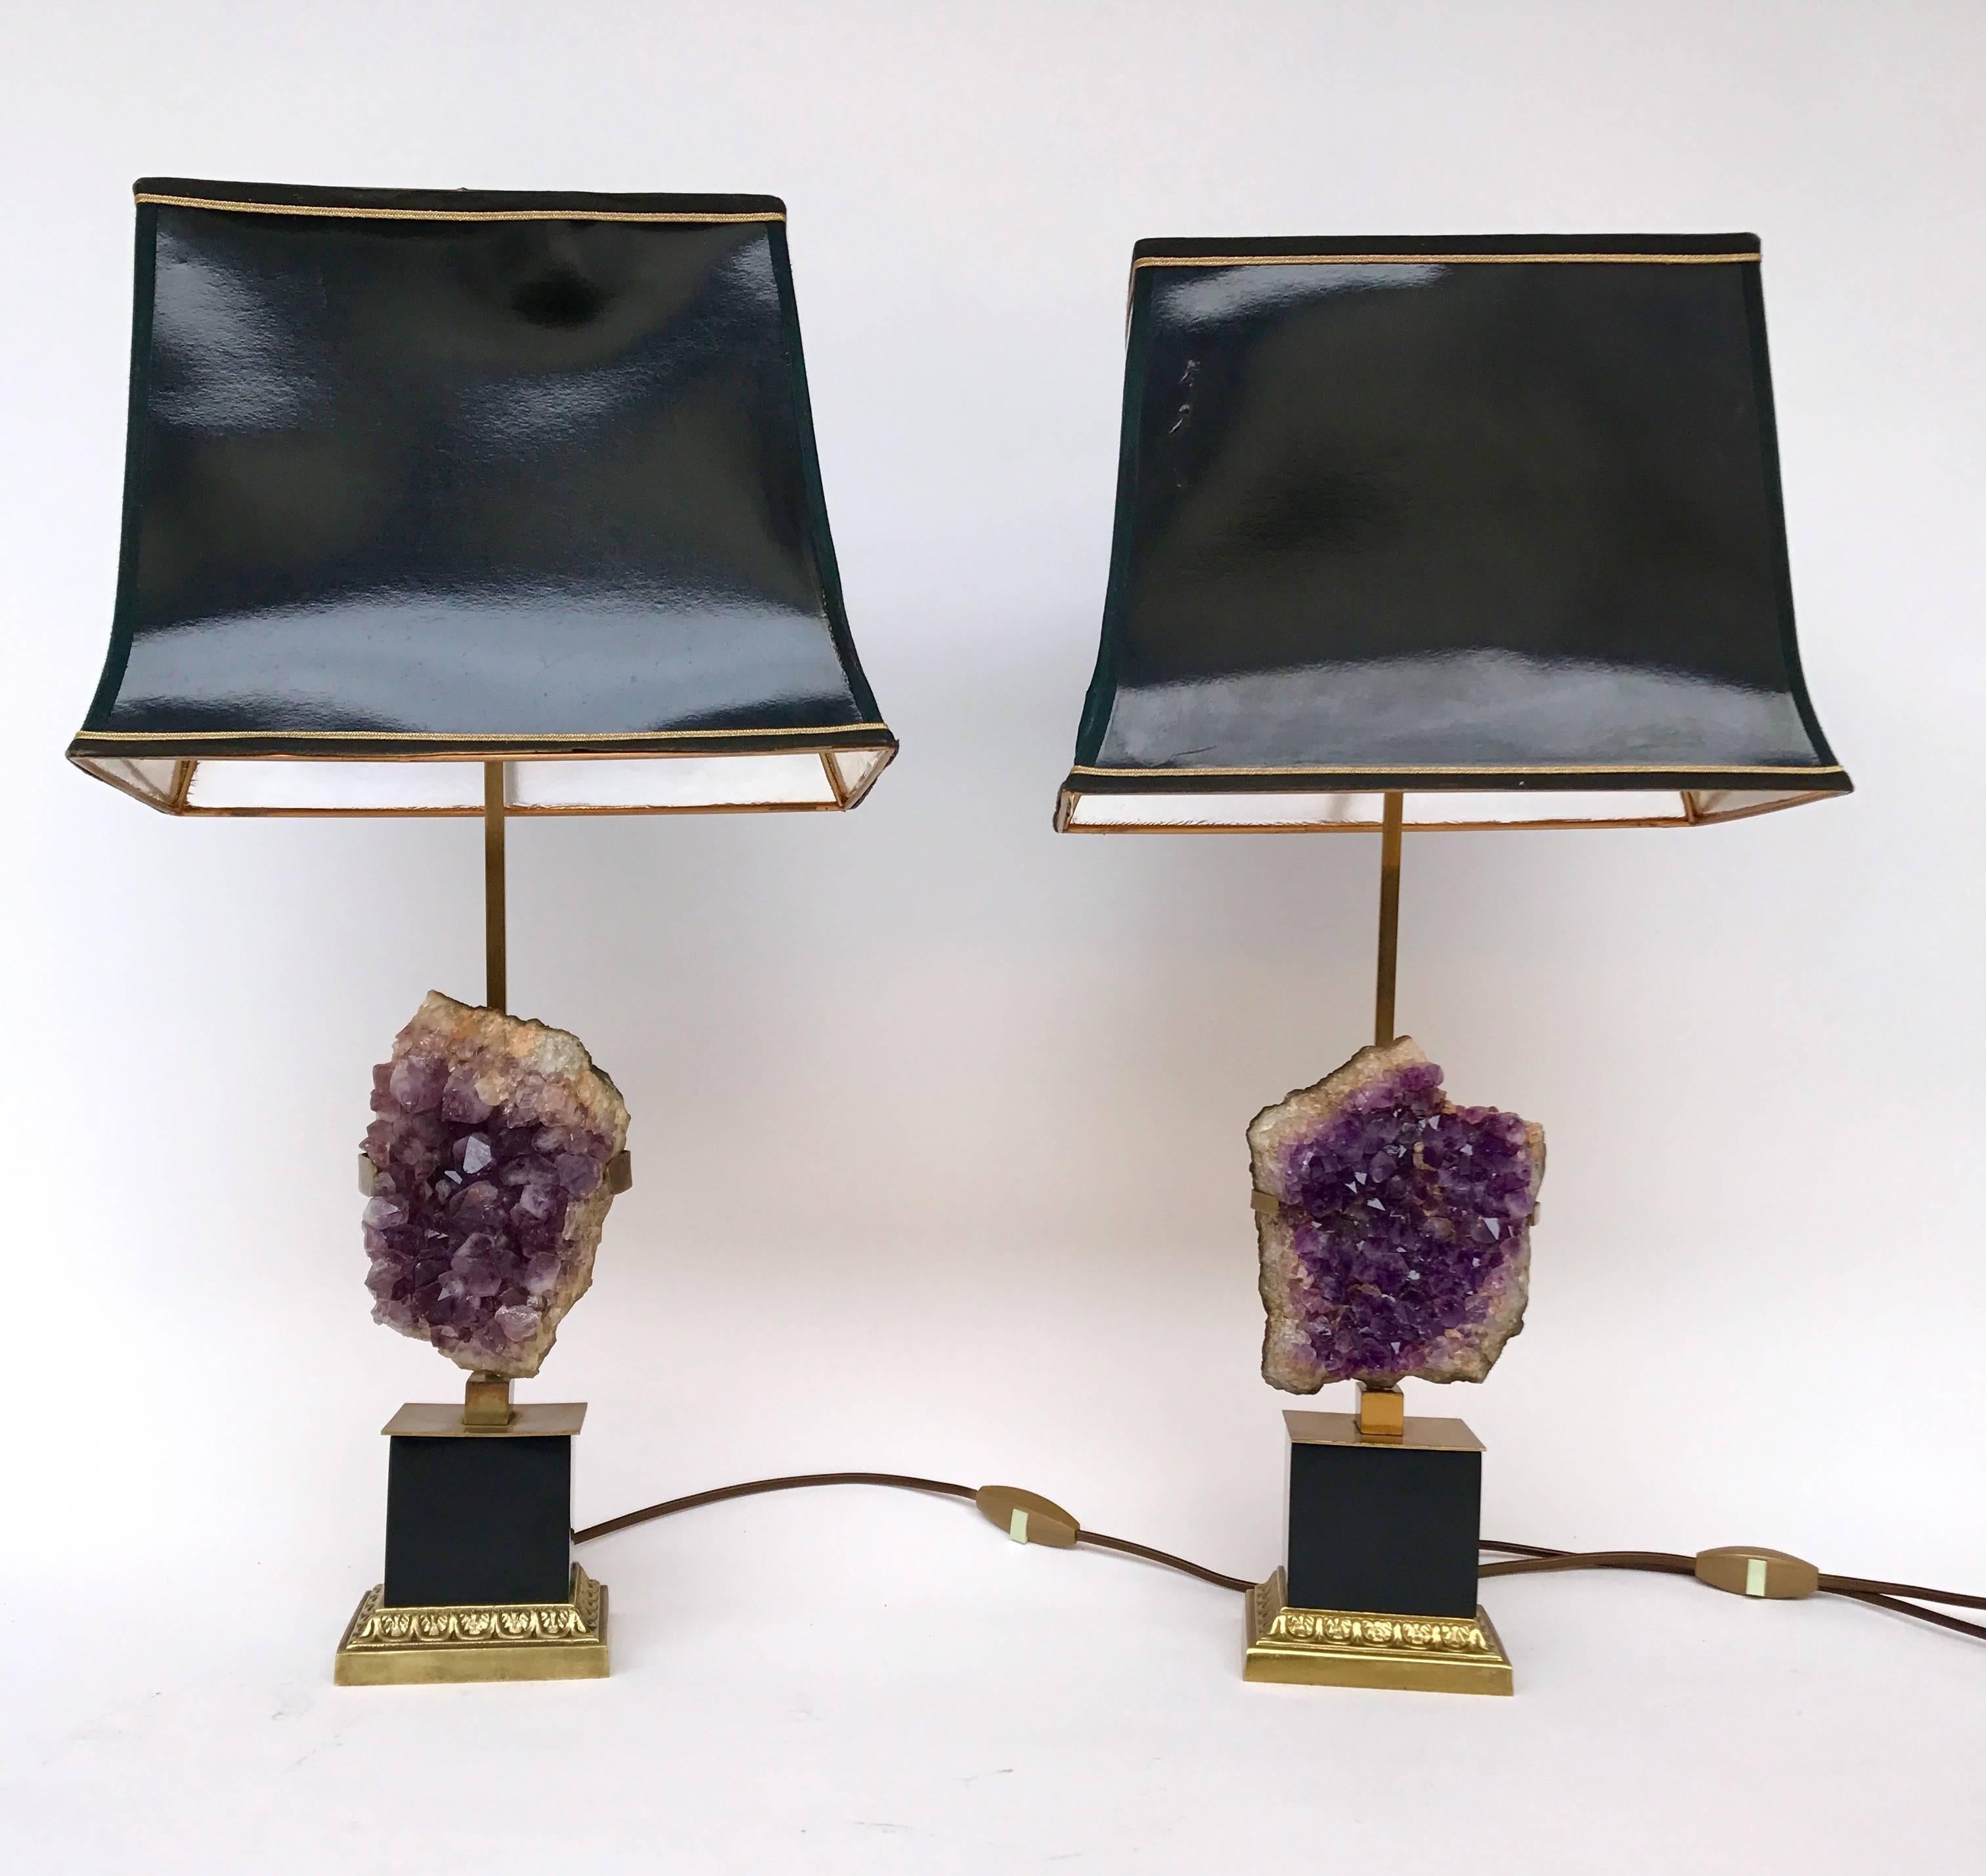 Elegant pair of table, bedside lamps in a neoclassical or curiosity cabinet style very 1970s with natural amethyst, the stone like the quartz or rock crystal was used in the 70s lights. Original lampshade. Attributed to Maison Jansen famous